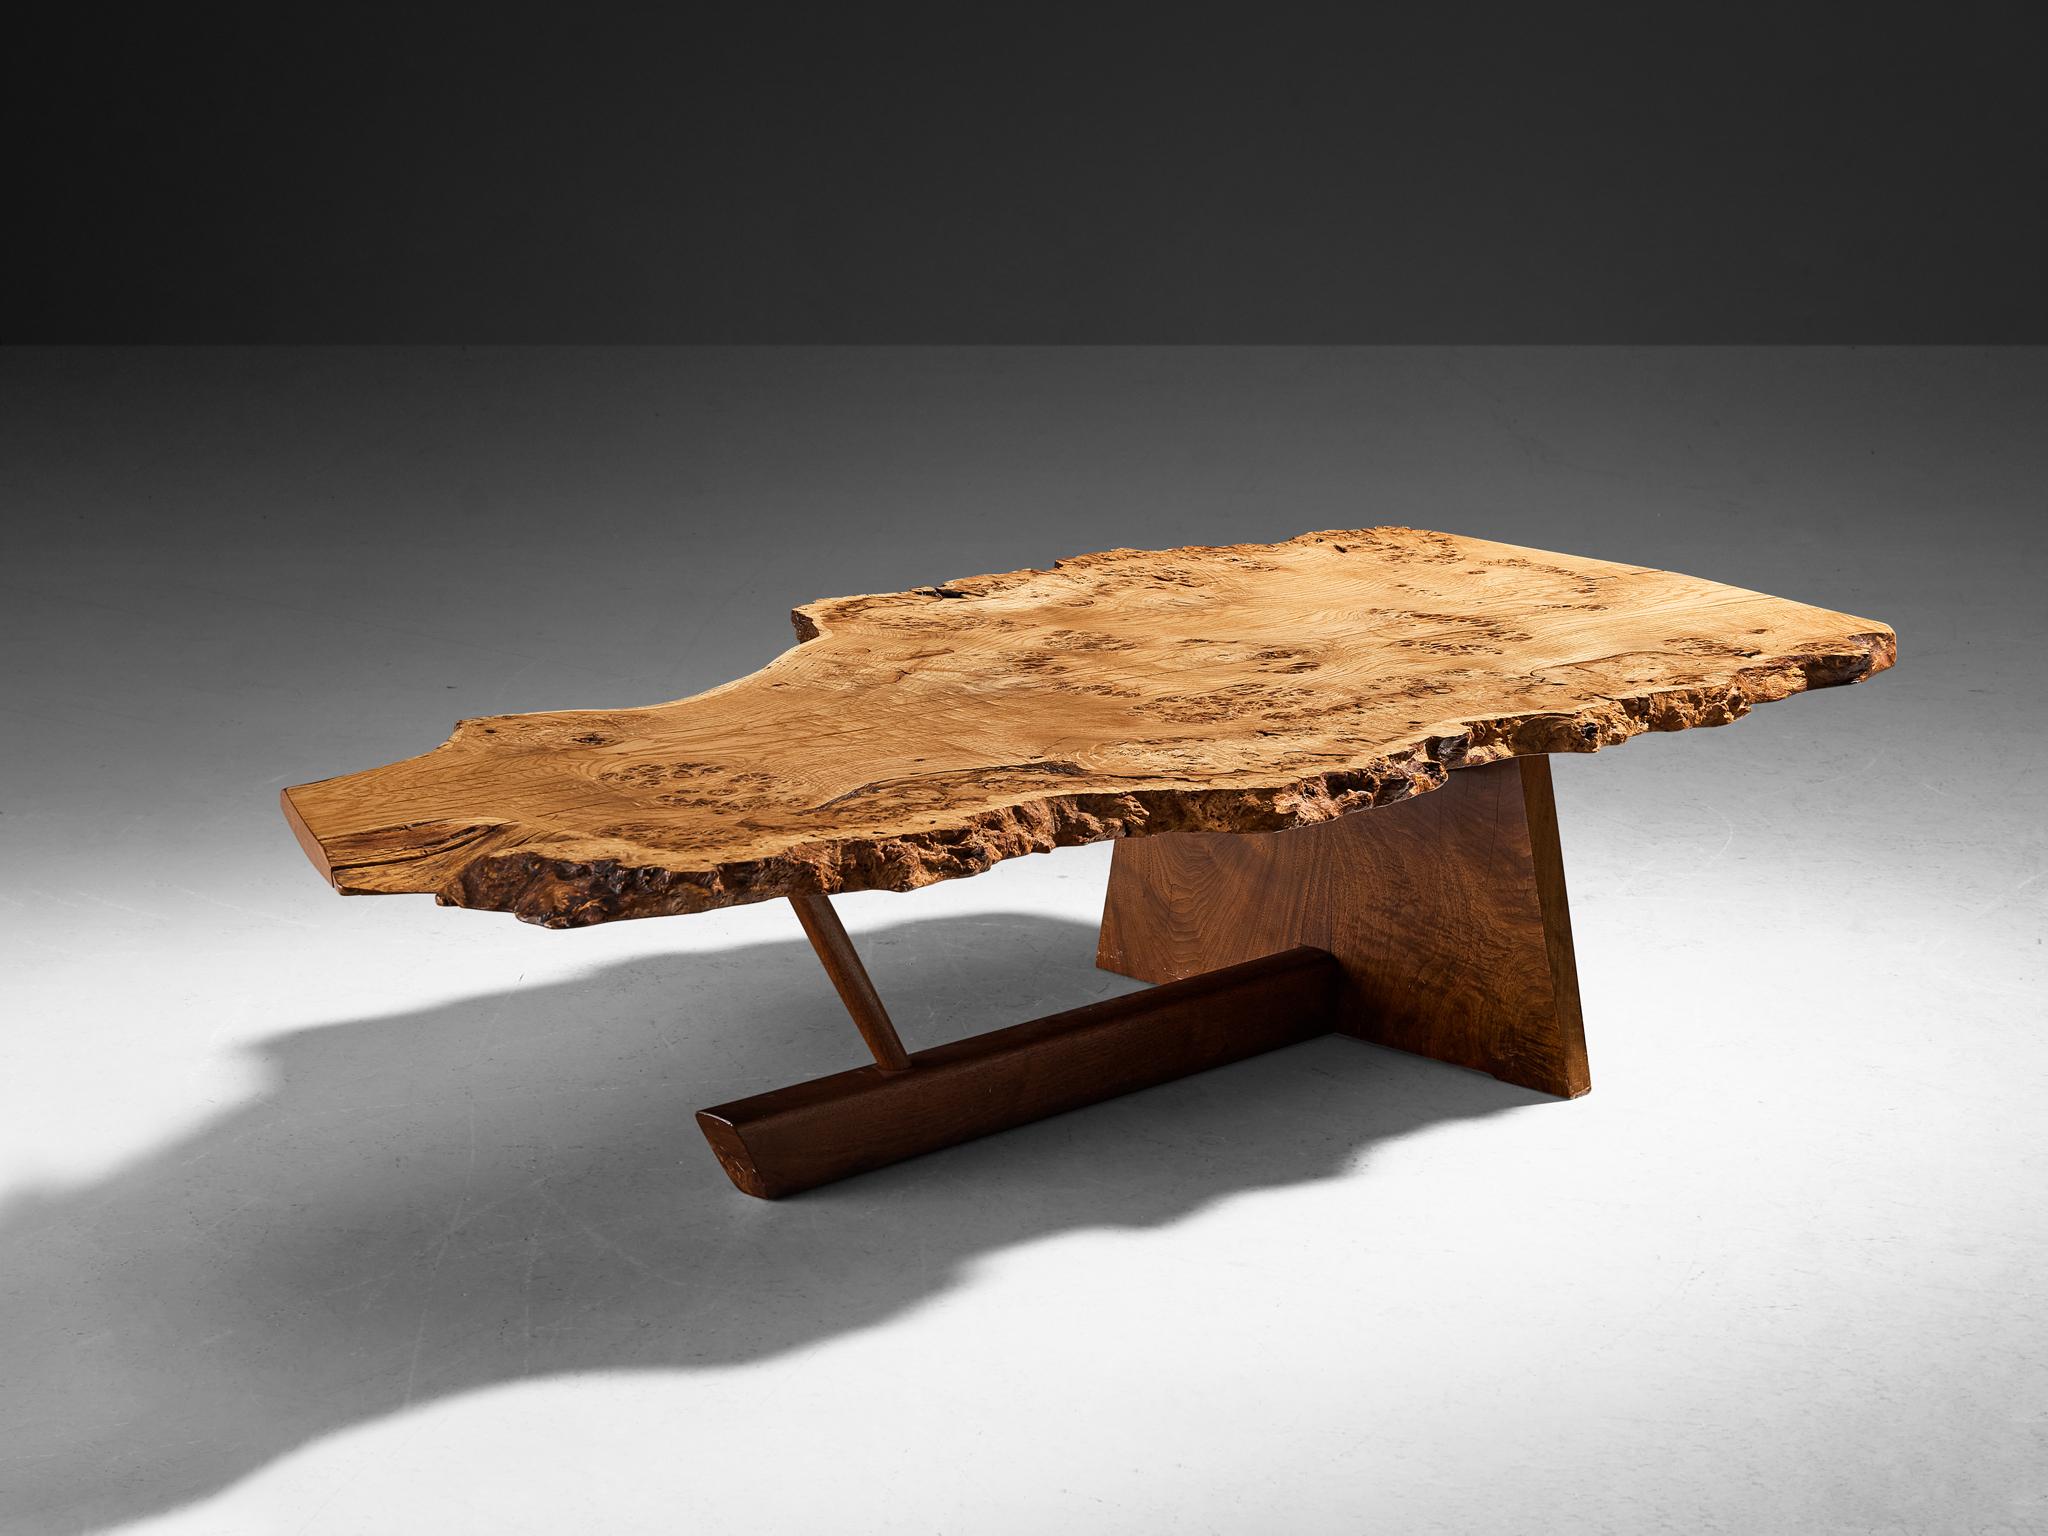 George Nakashima, 'Minguren II' coffee table, English oak burl, oak, American black walnut, United States, 1980 

American woodworker and designer George Nakashima proves with this quintessential table that he is a true master of his craft. The